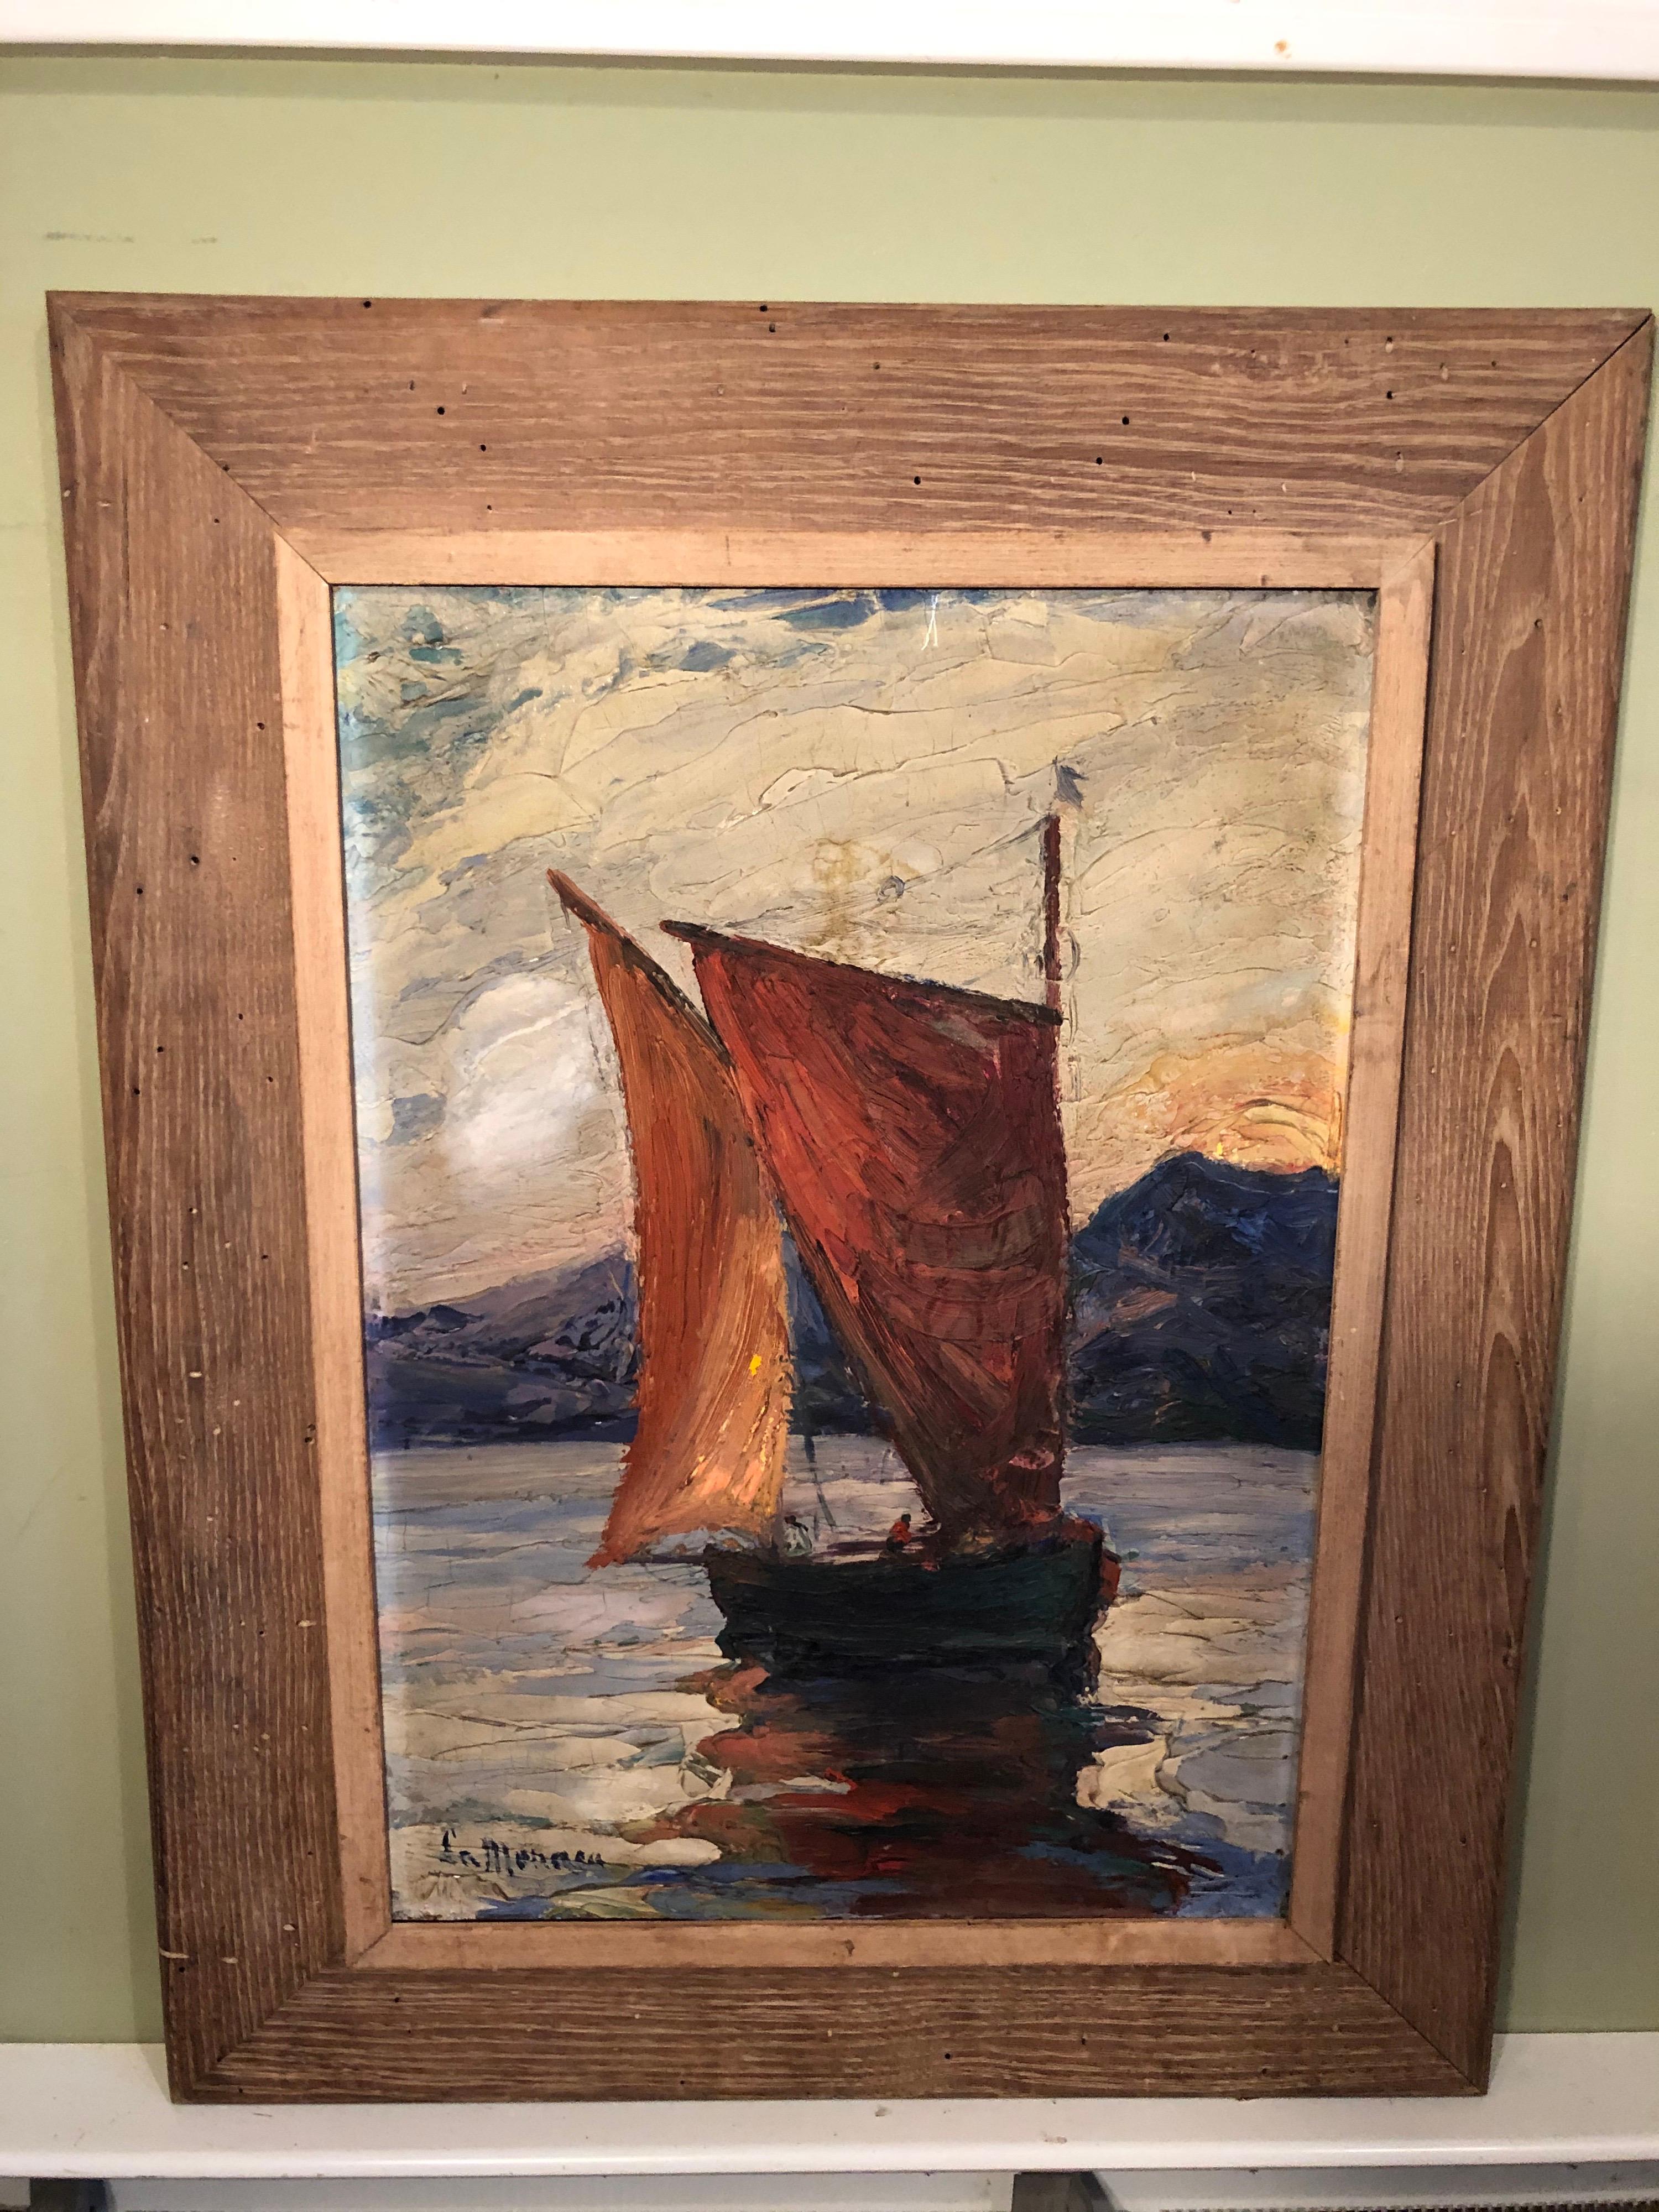 Signed Impasto on Board of Sailboat. Heaby impasto technique with a lot of movement and form. Perfect for that beach house or sailors home. Romantic and realistic portryal. Housed in a solid driftwood style vintage frame of the mid century era.
